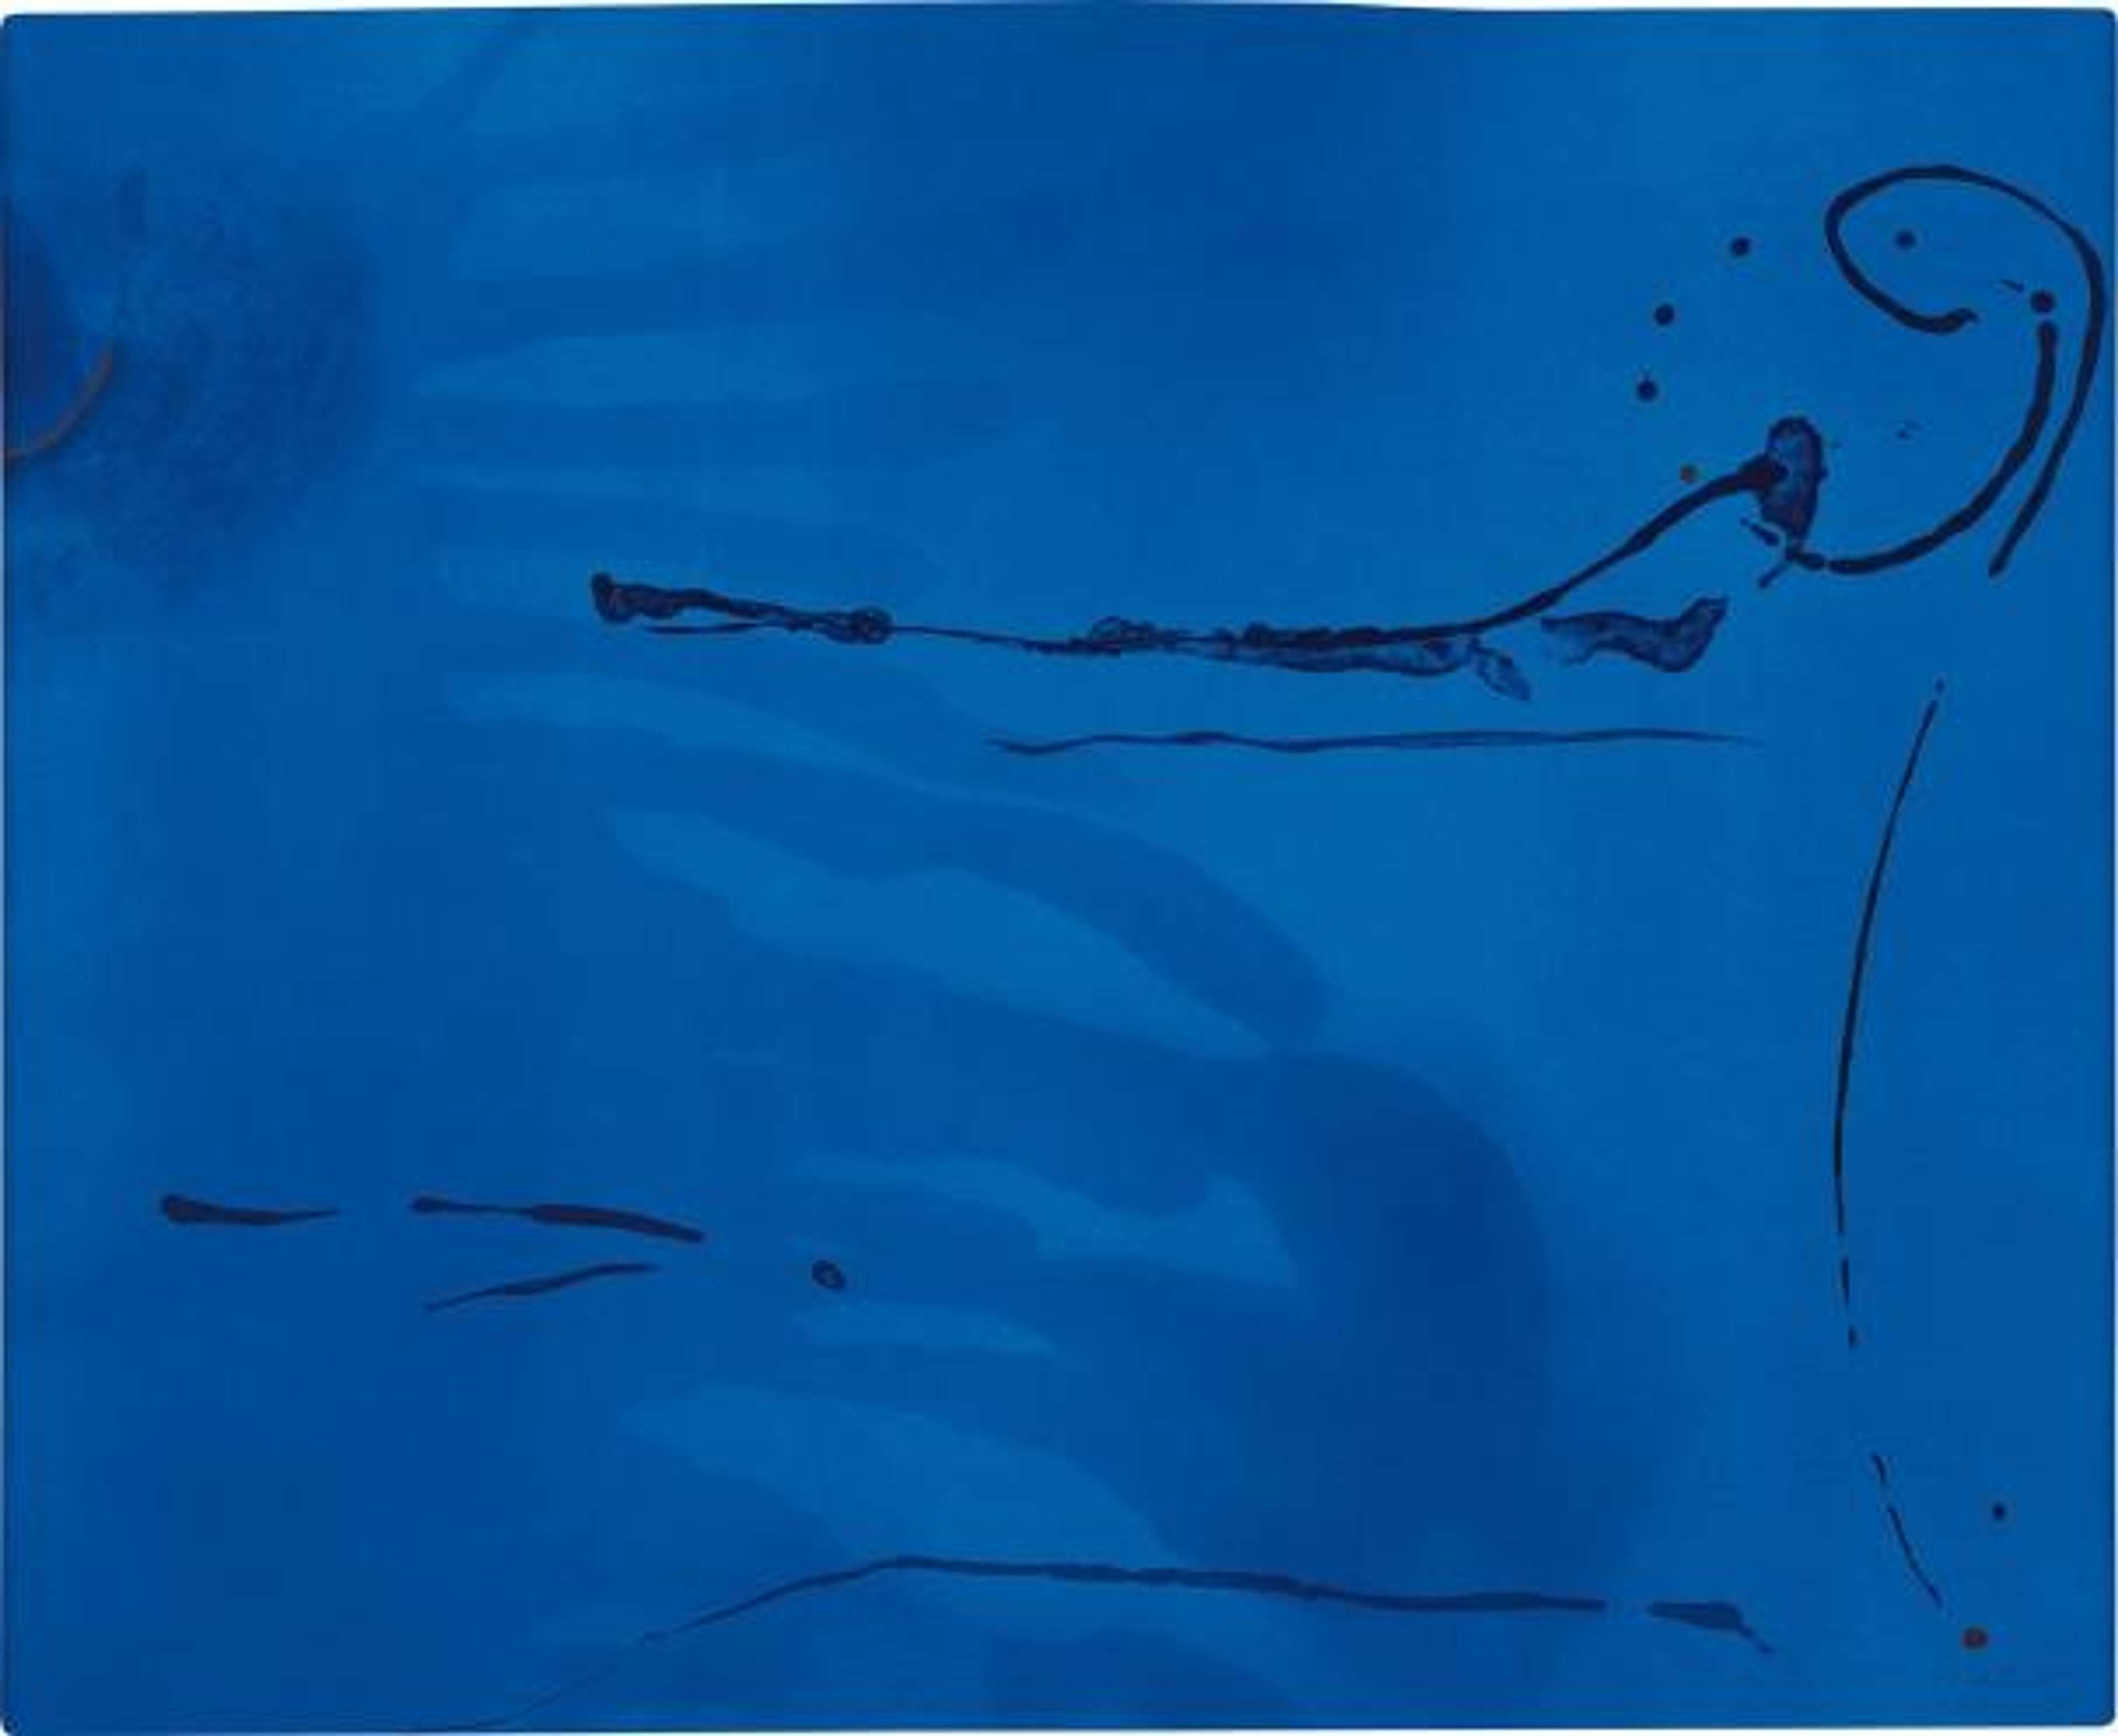 Helen Frankenthaler’s Blue Current. An abstract expressionist intaglio of deep blue water currents.v